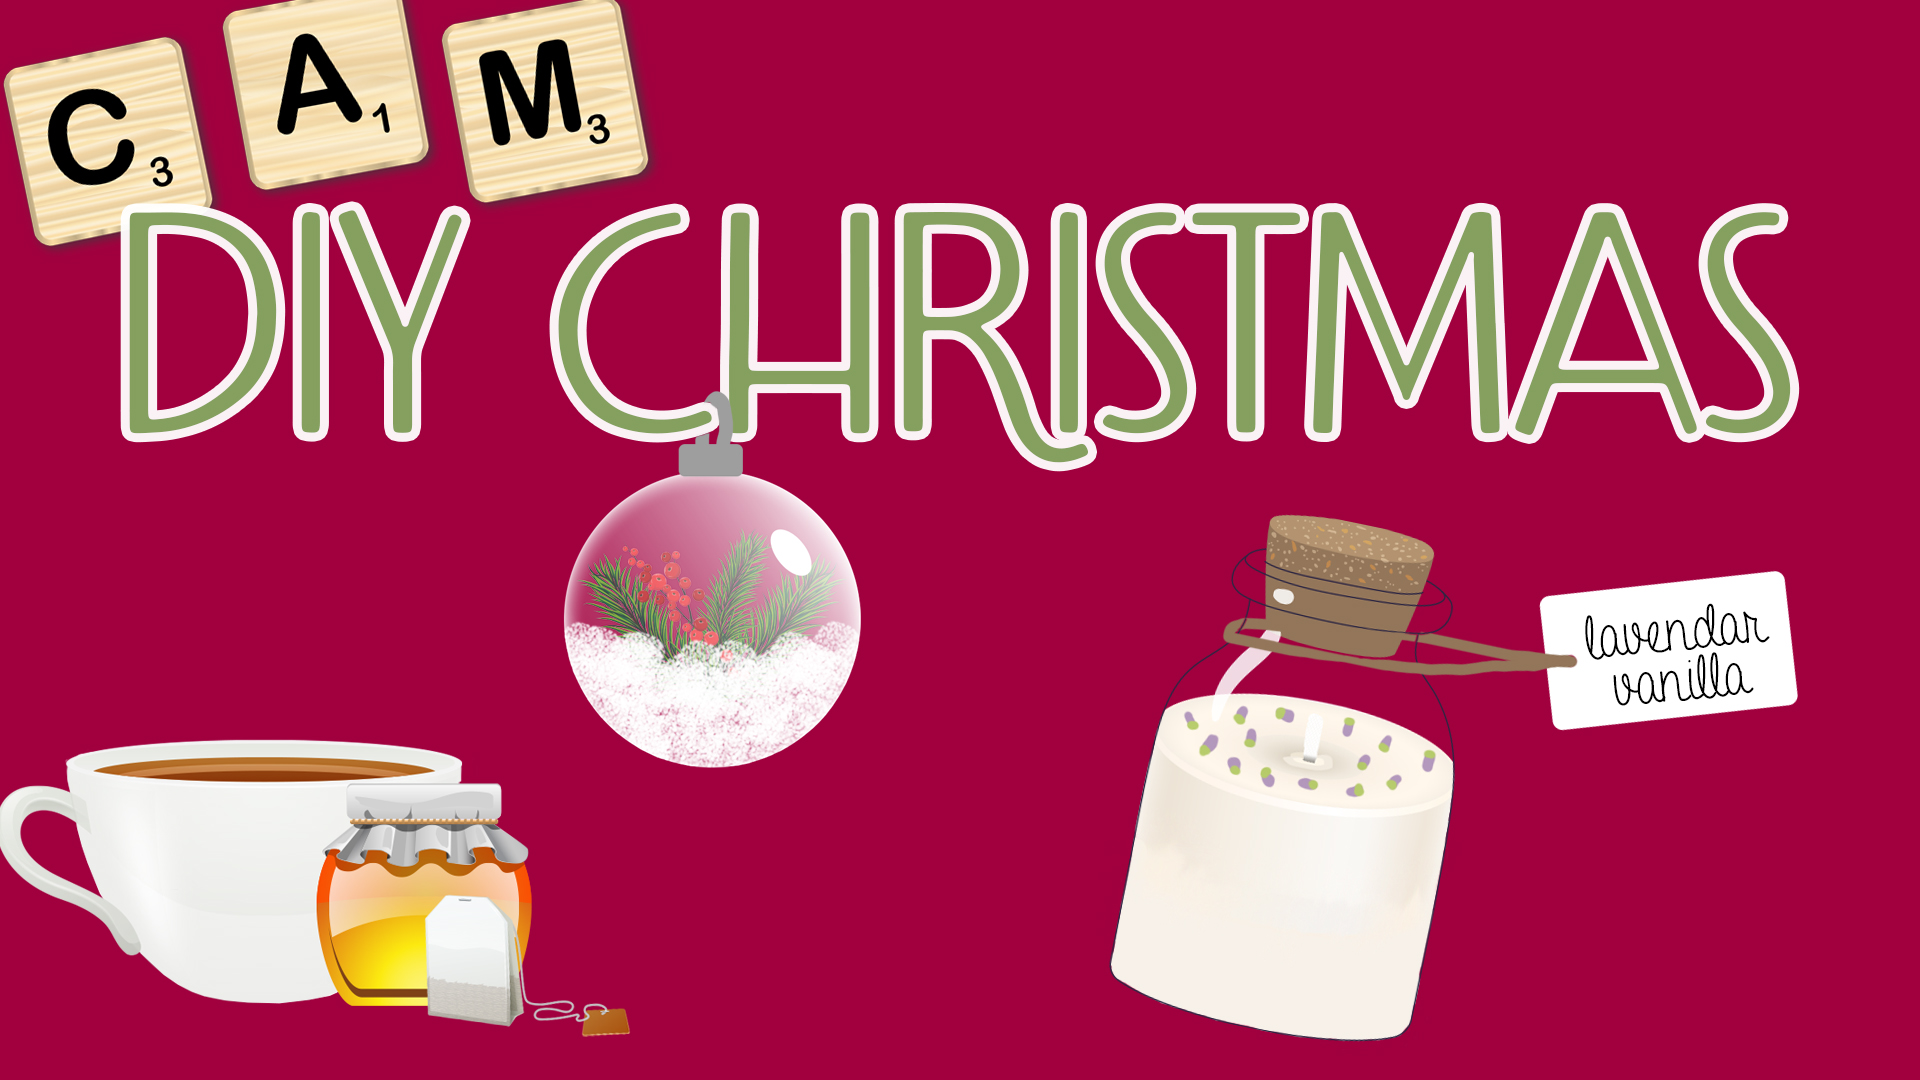 Image reads "DIY Christmas" against a cranberry-colored background. Letter magnets, a teacup with a honey sample, an ornament, and a candle are scattered among the image.